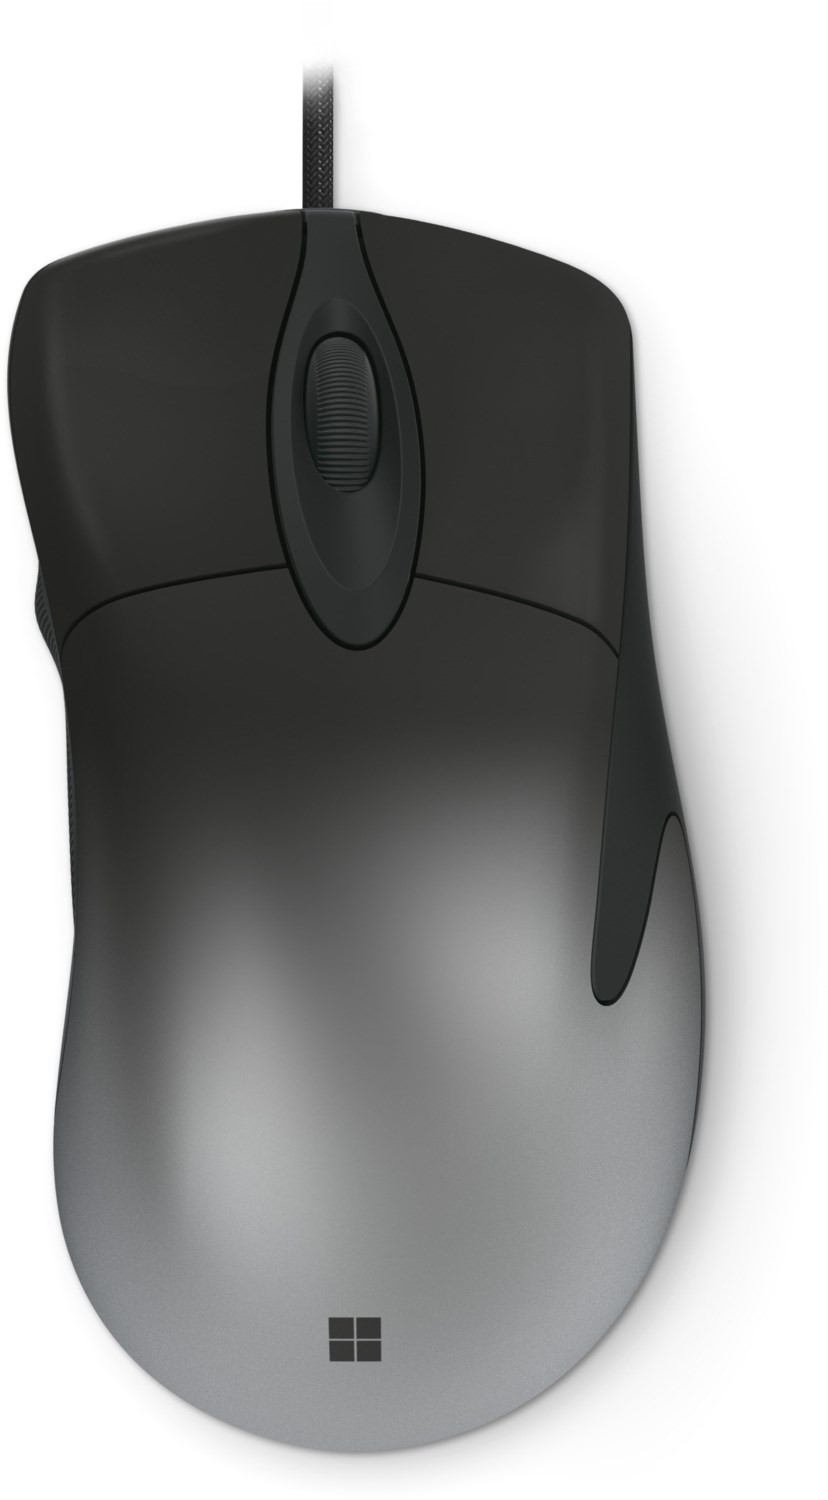 Pro IntelliMouse shadow black